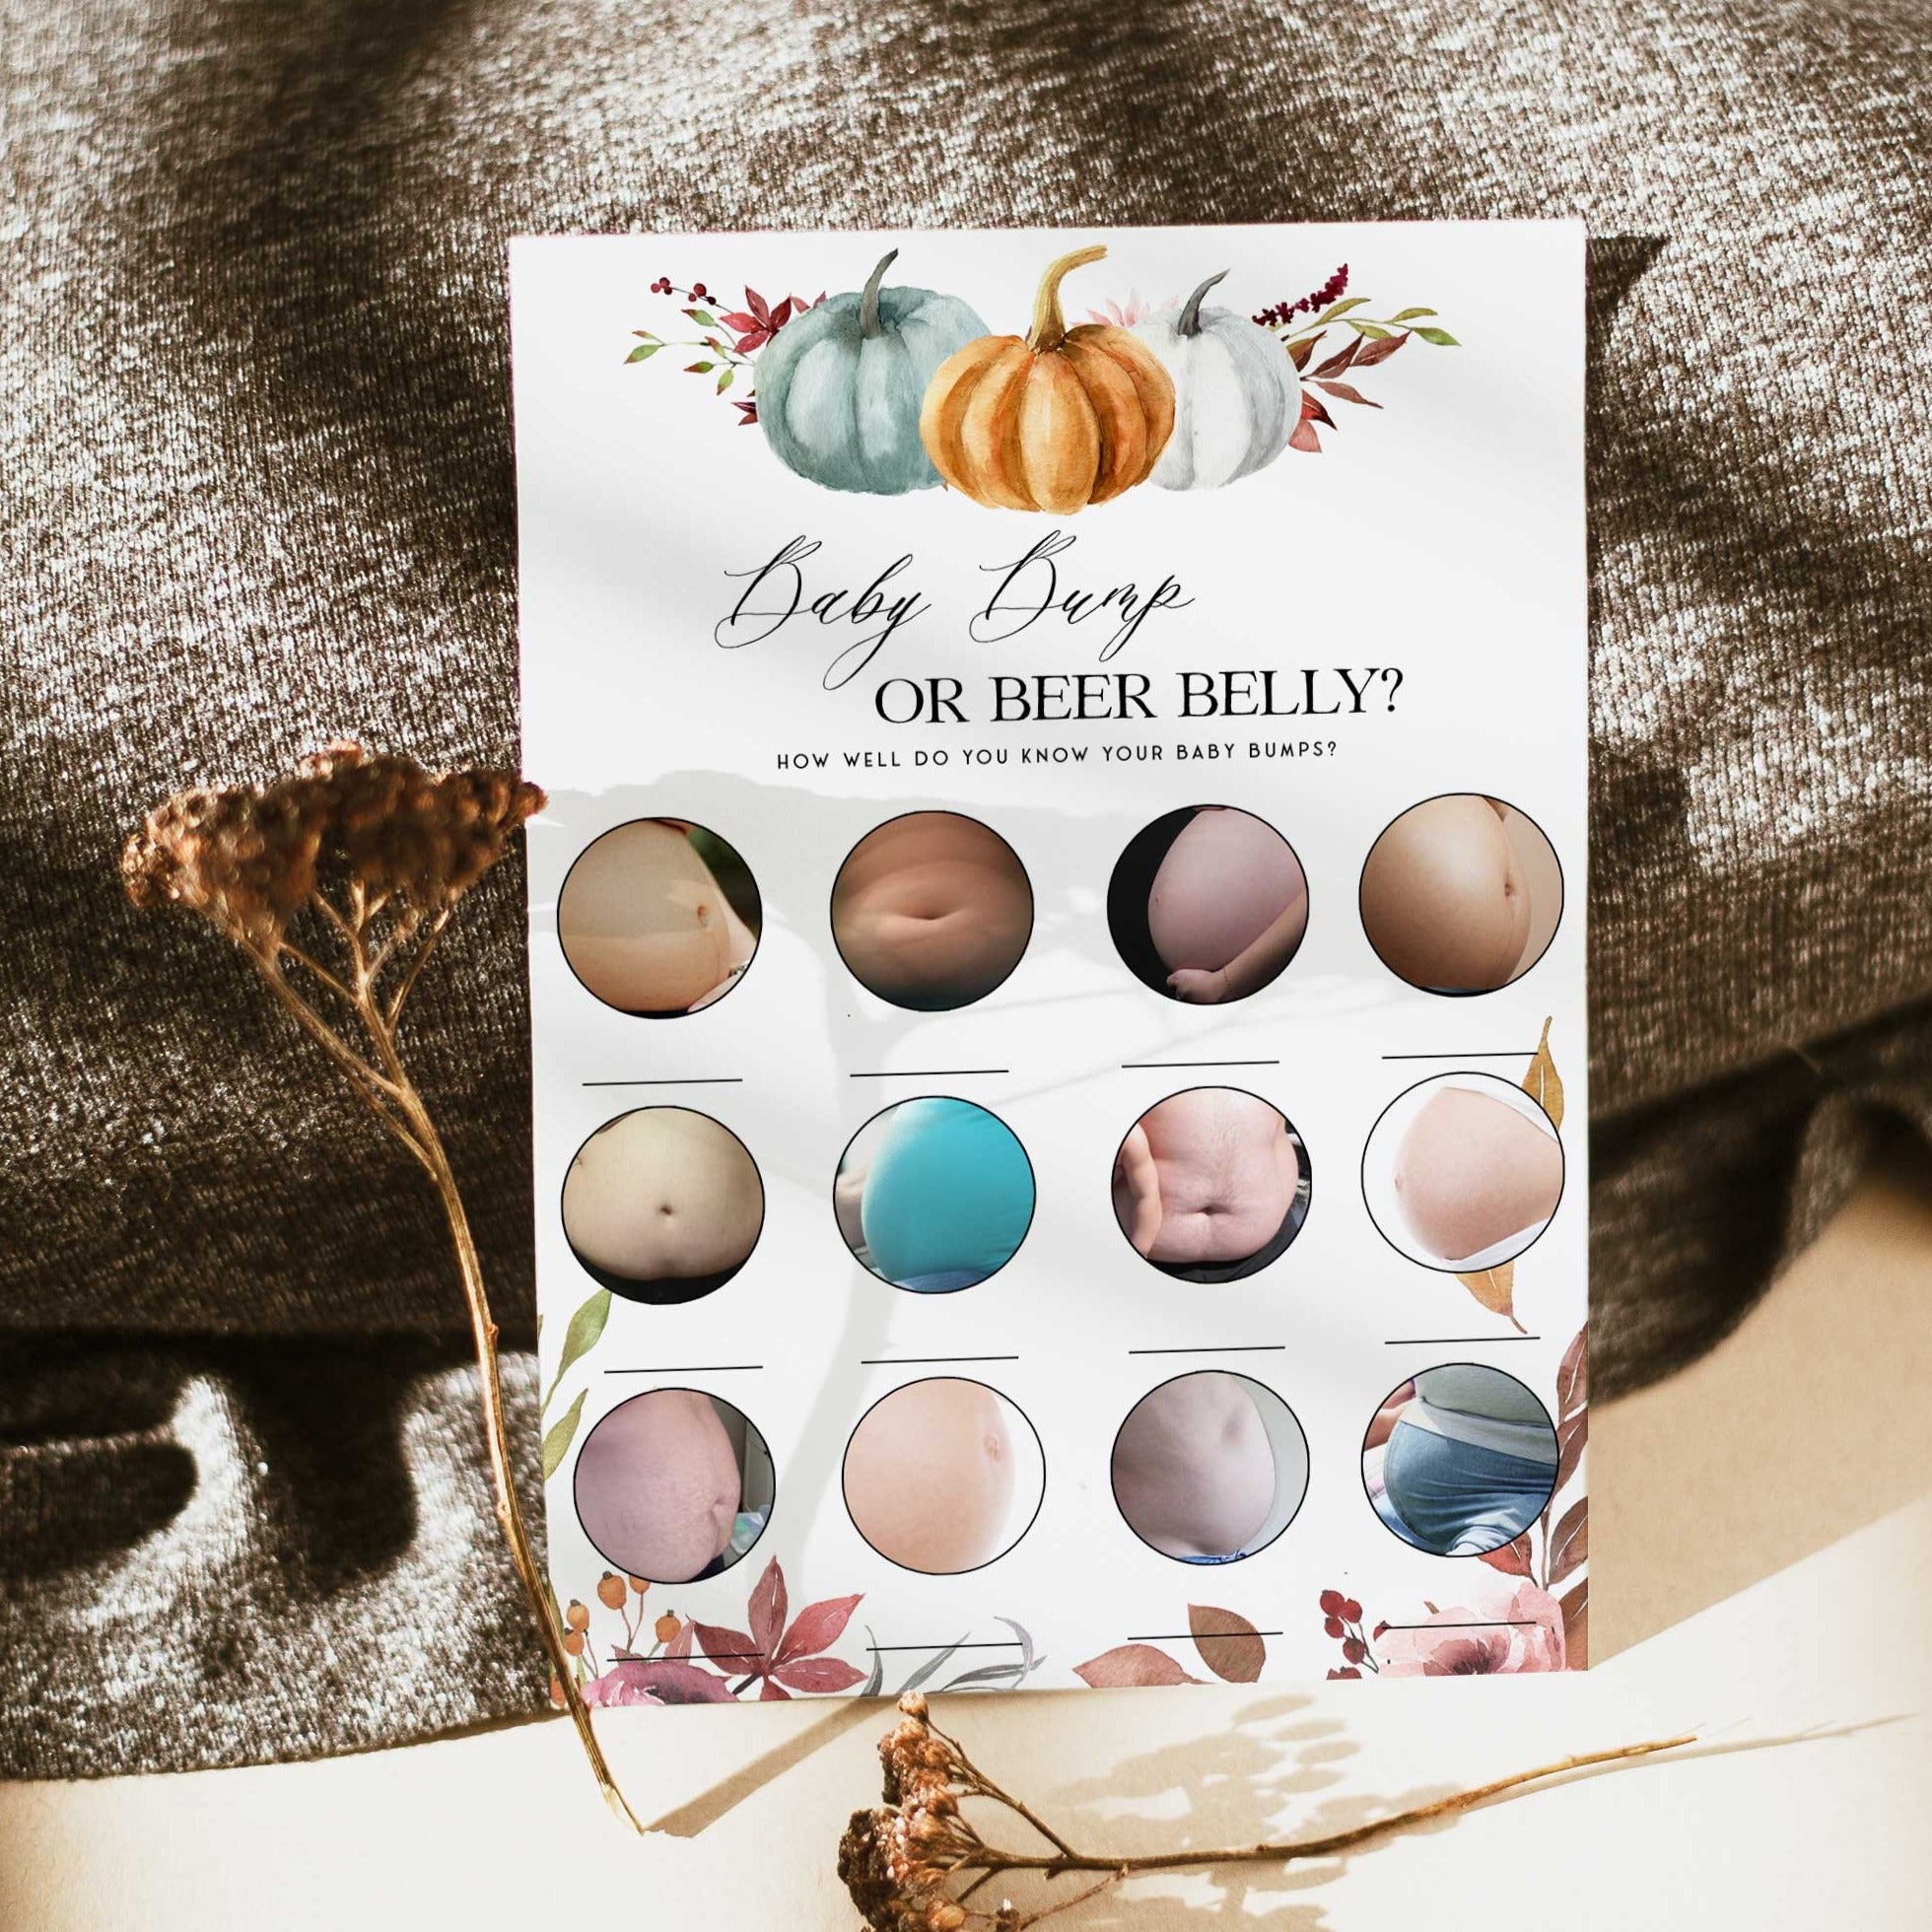 Fully editable and printable baby shower porn or labor, baby bump or beer bally games with a fall pumpkin design. Perfect for a Fall Pumpkin baby shower themed party